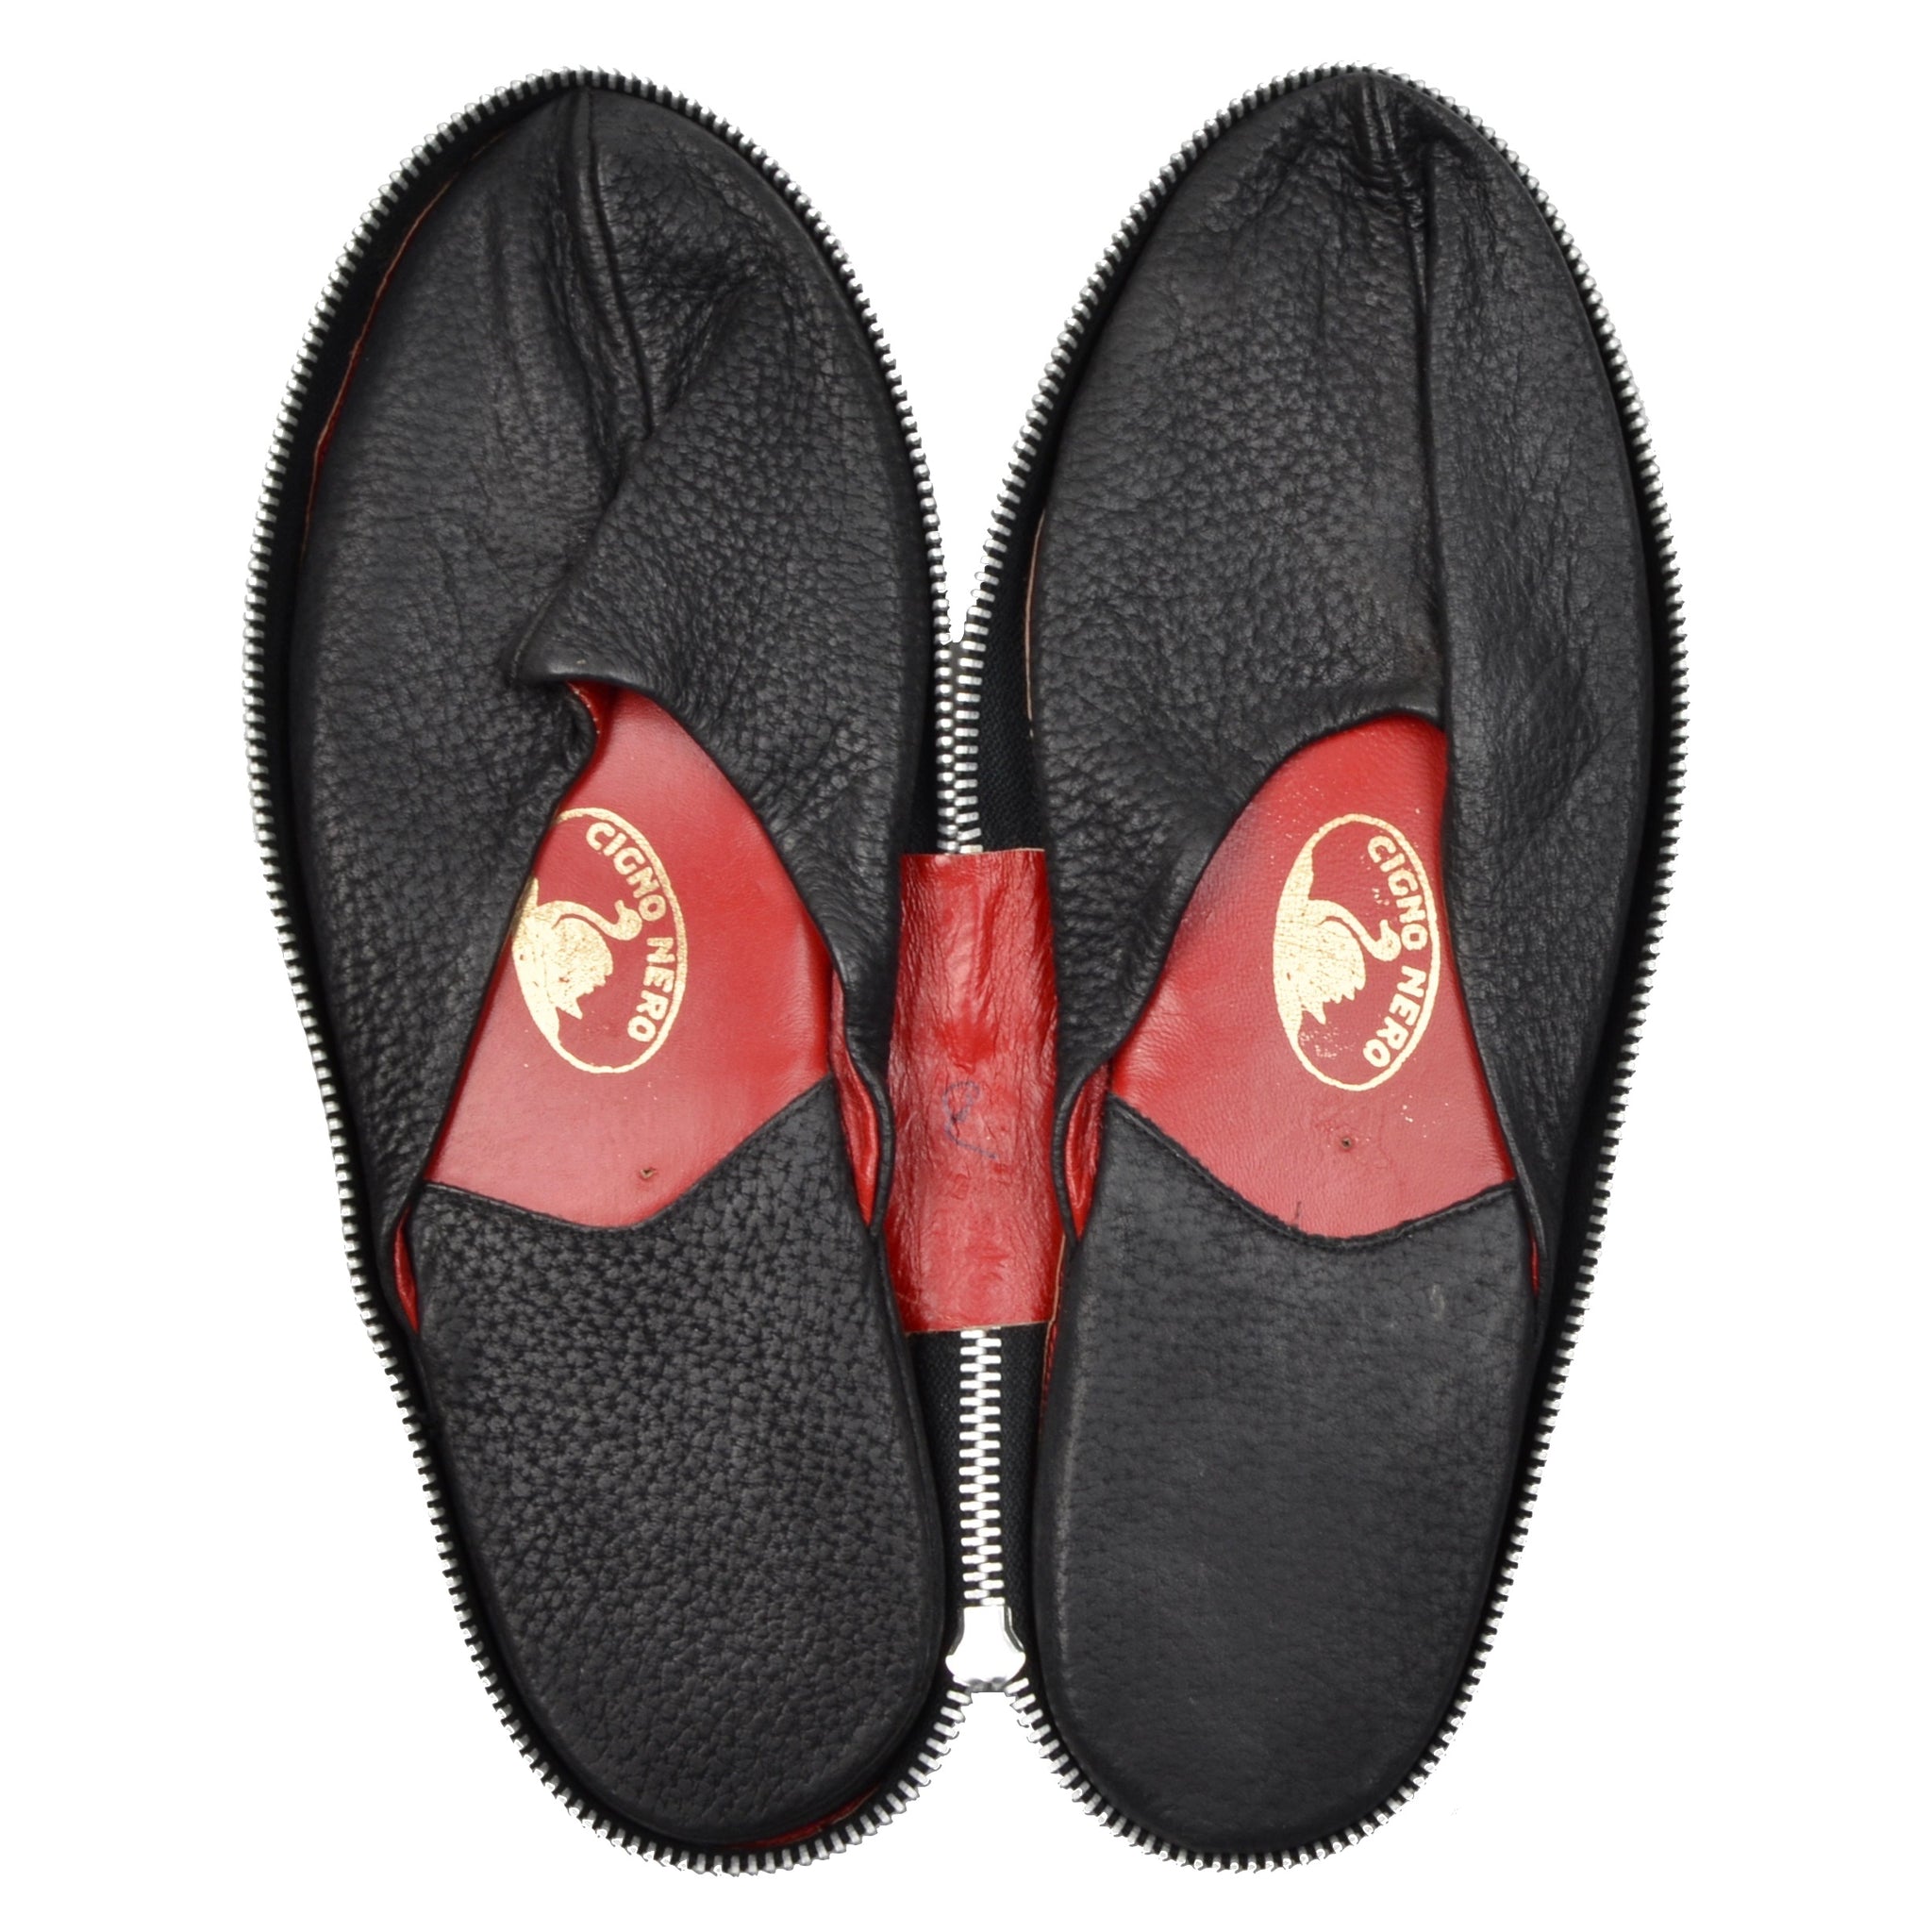 leather travel slippers